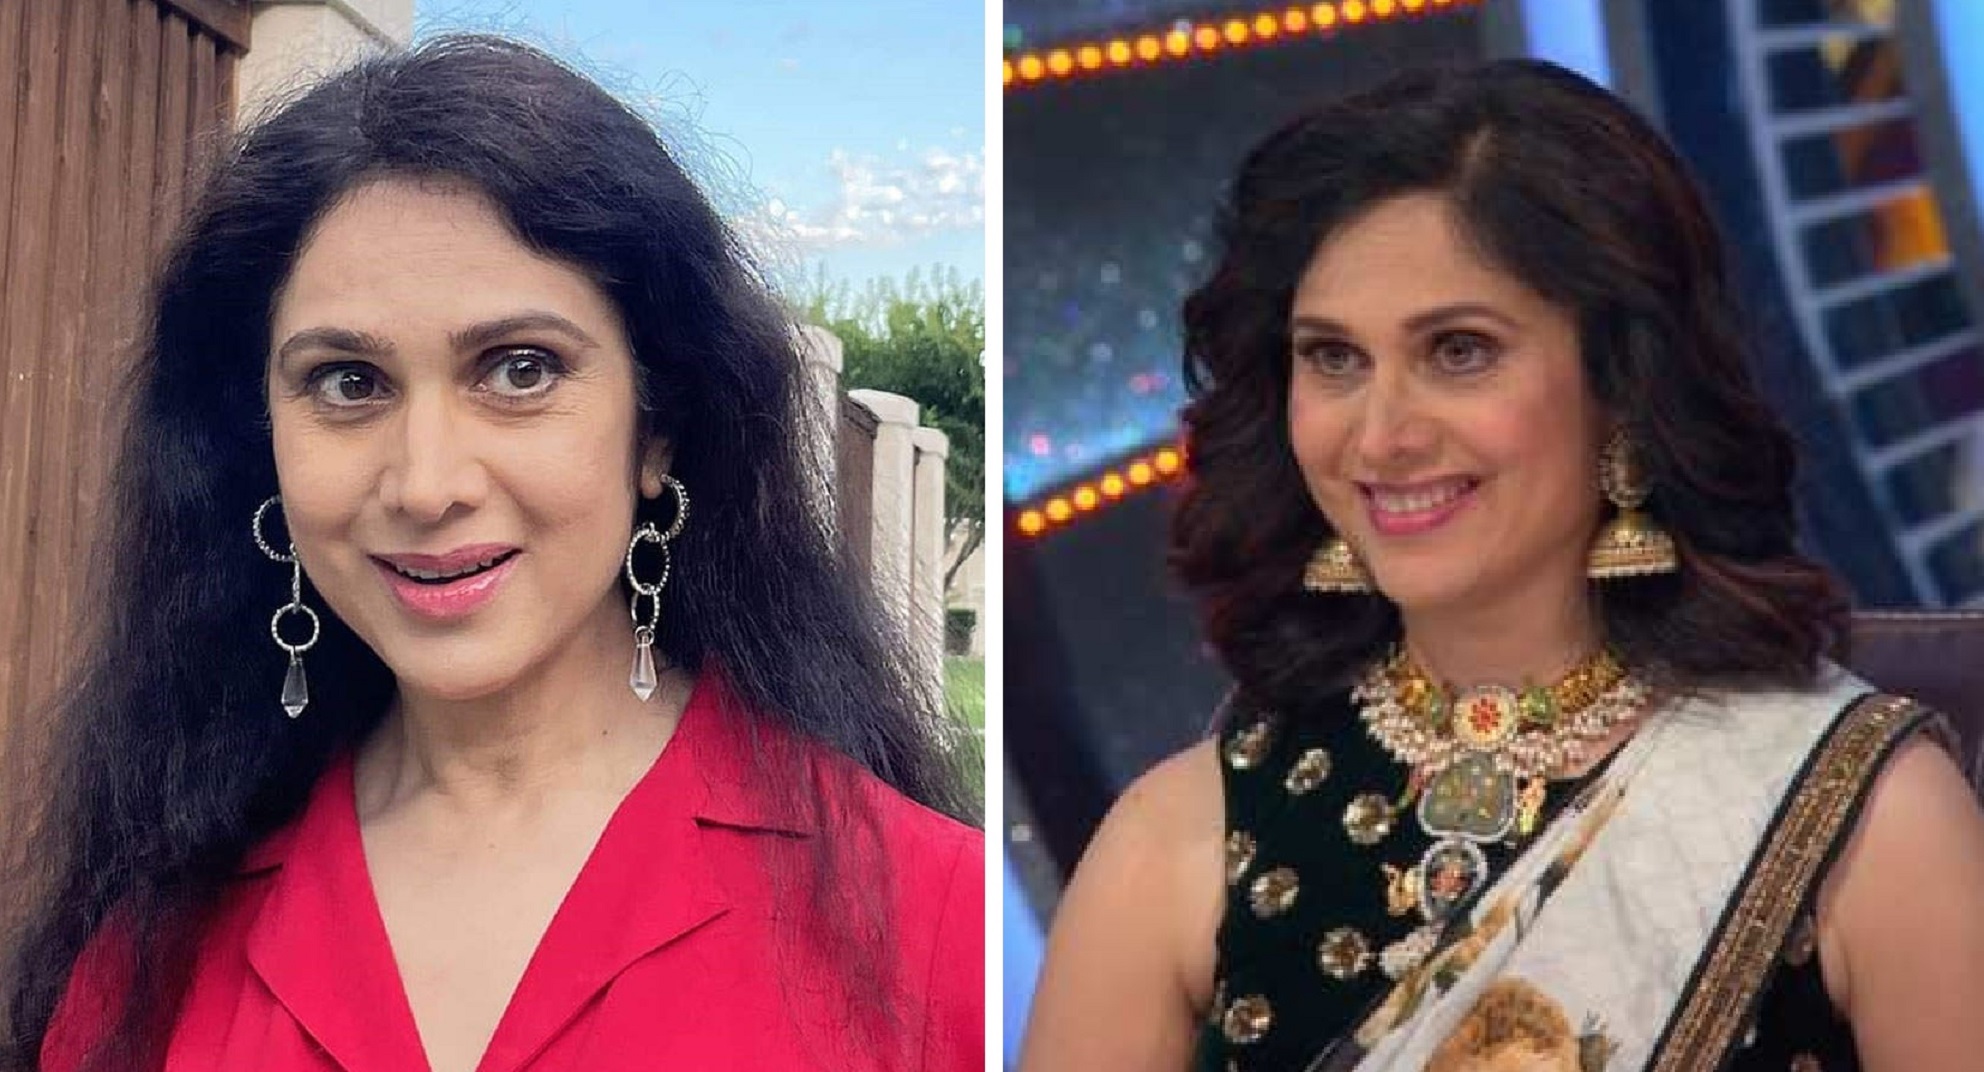 Superstar actress Meenkashi Seshadri says she has become a Bawarchi after moving to the US, treats Indian Idol judges with homemade food